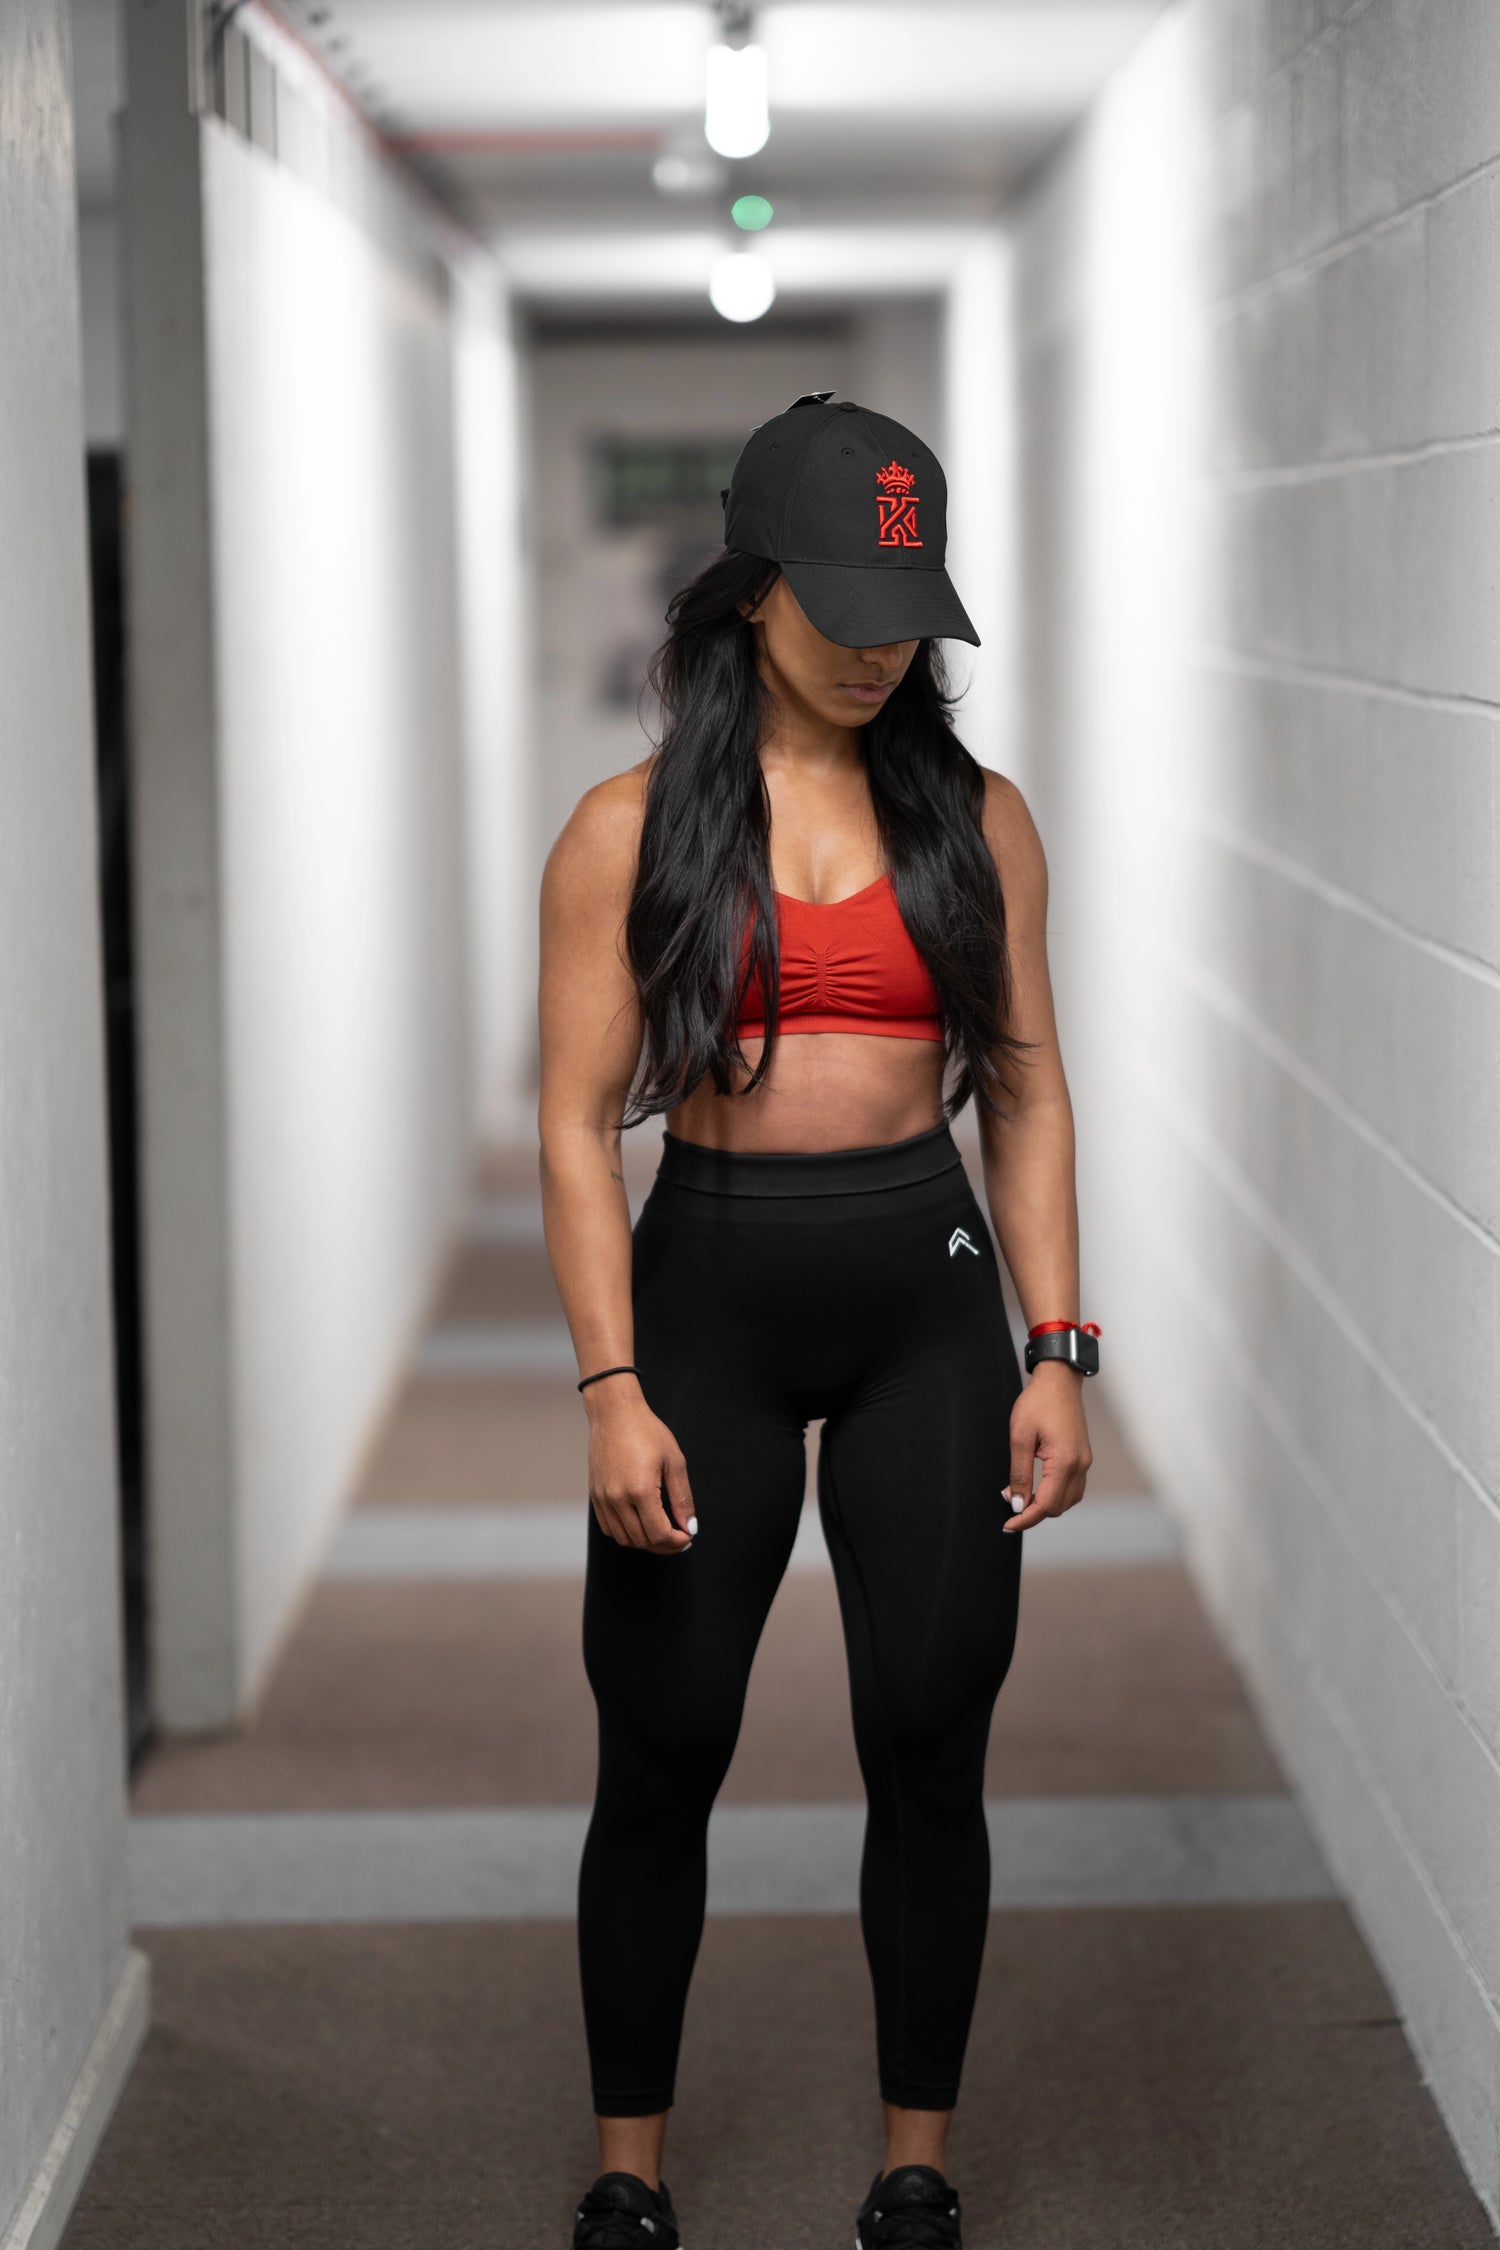 KingsGym Cool Red Cap On Lady